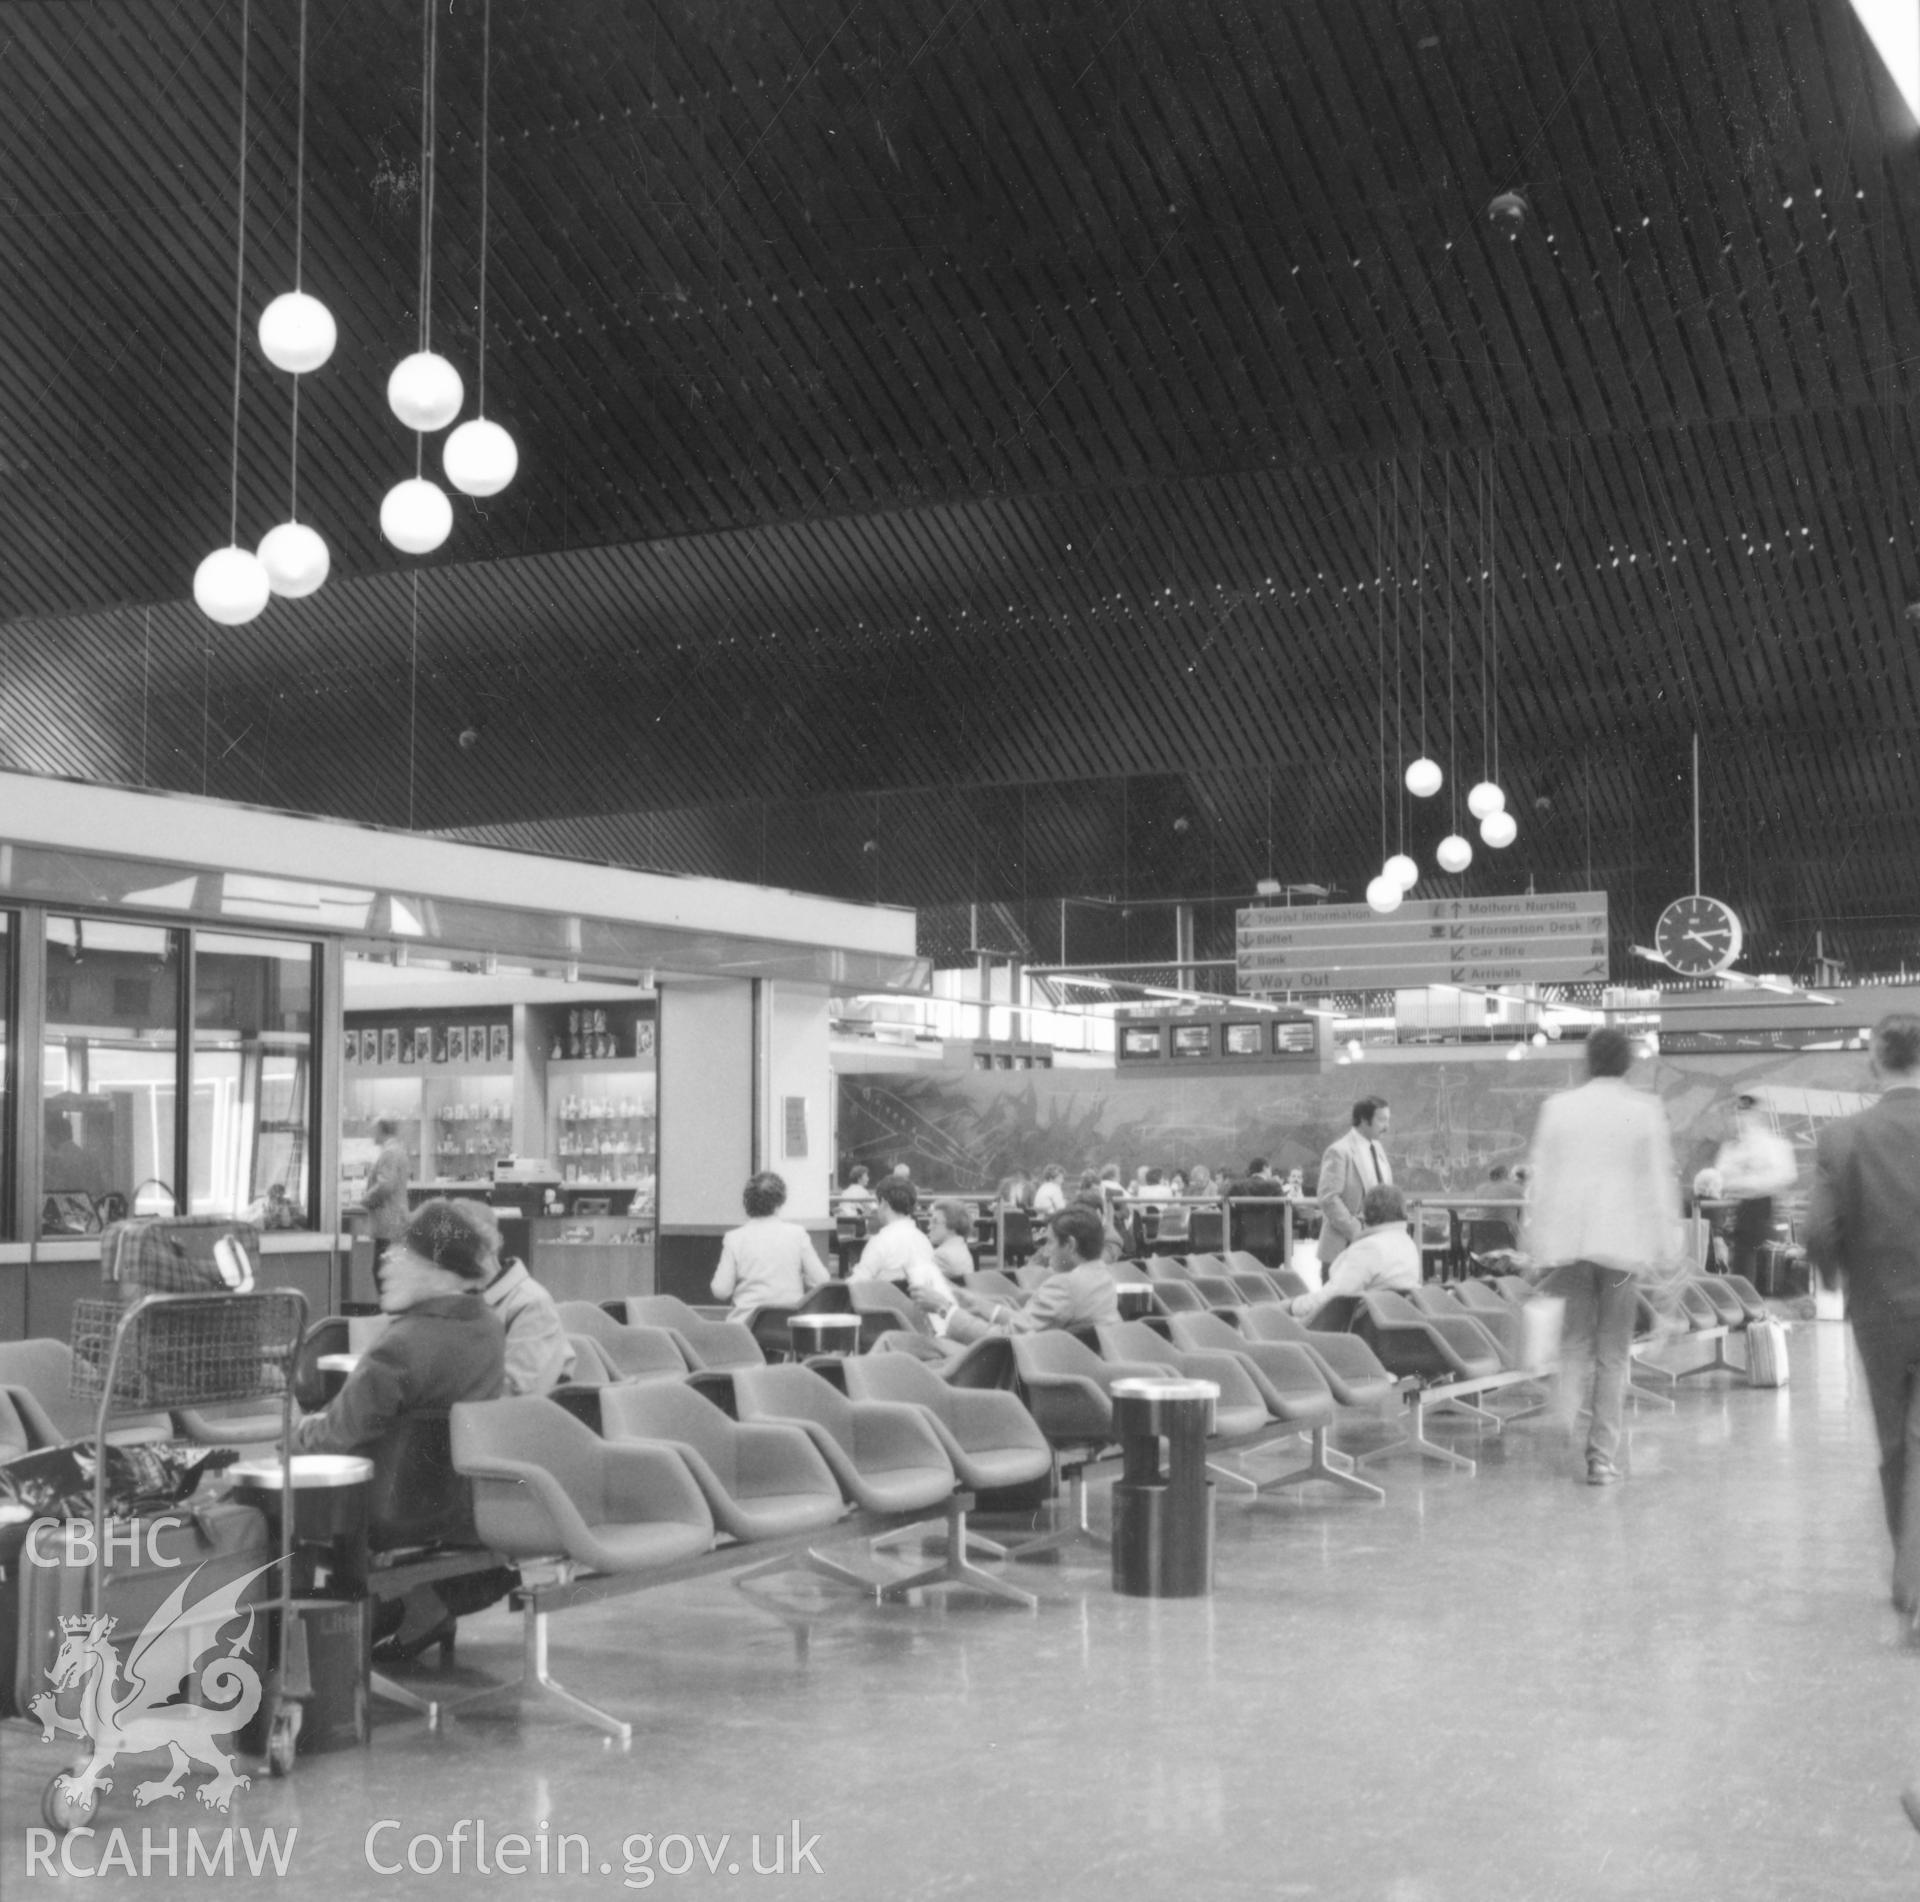 Interior view of the airport lounge at Rhoose Airport, Cardiff taken in 1980.  From the Central Office of Information Collection.